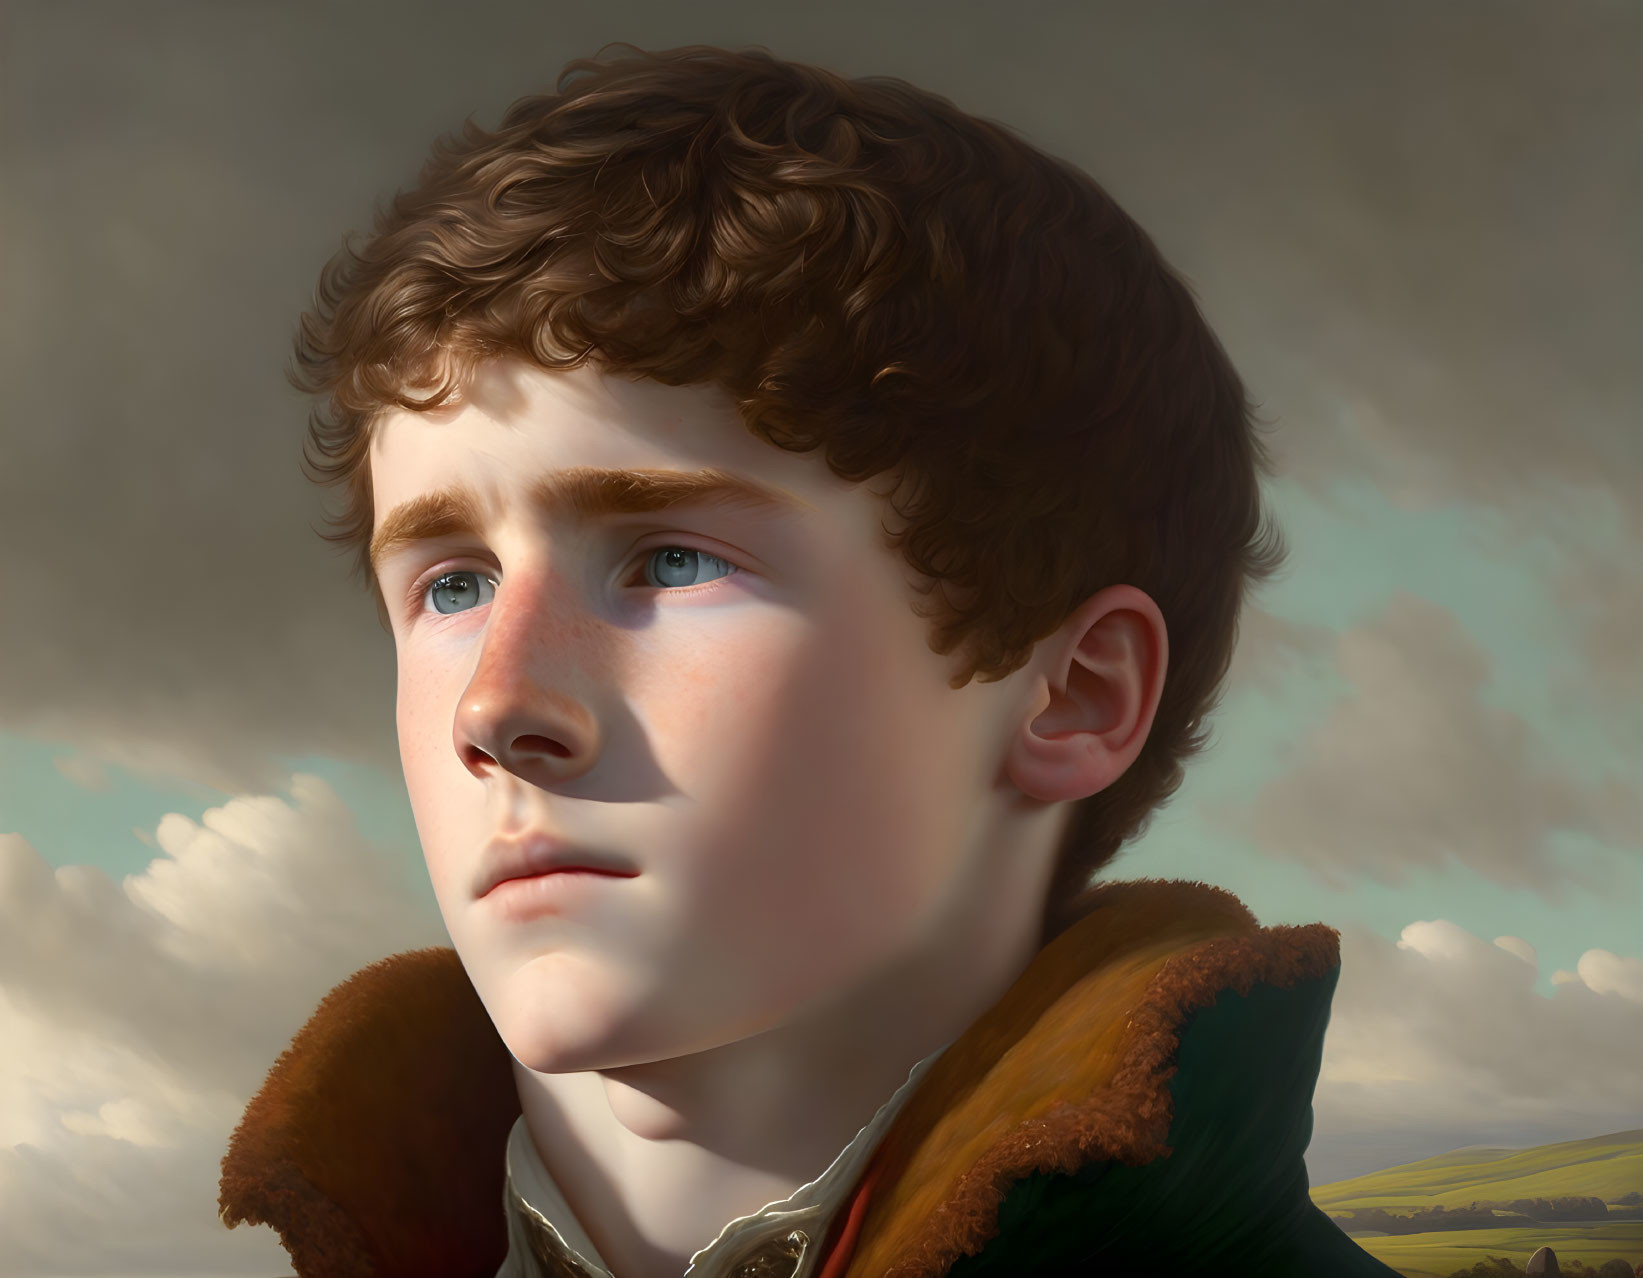 Young man with curly hair in a digital painting against cloudy sky and landscape